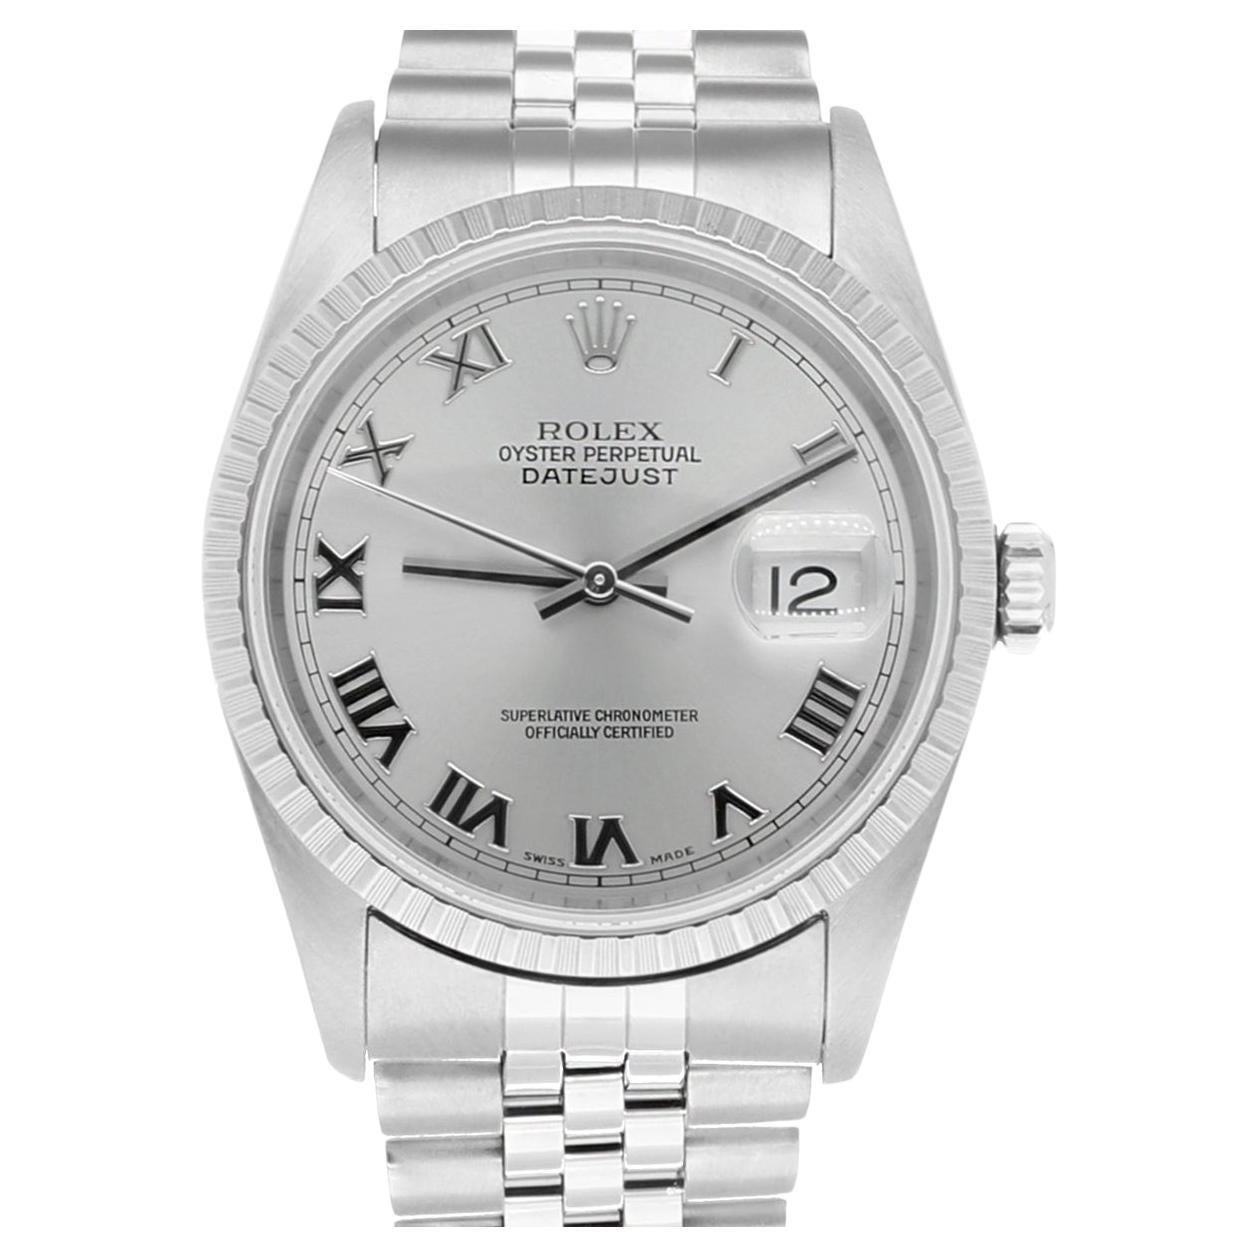 Rolex Datejust 36 Stainless Steel Quickset Watch Silver Roman Dial 16220 For Sale